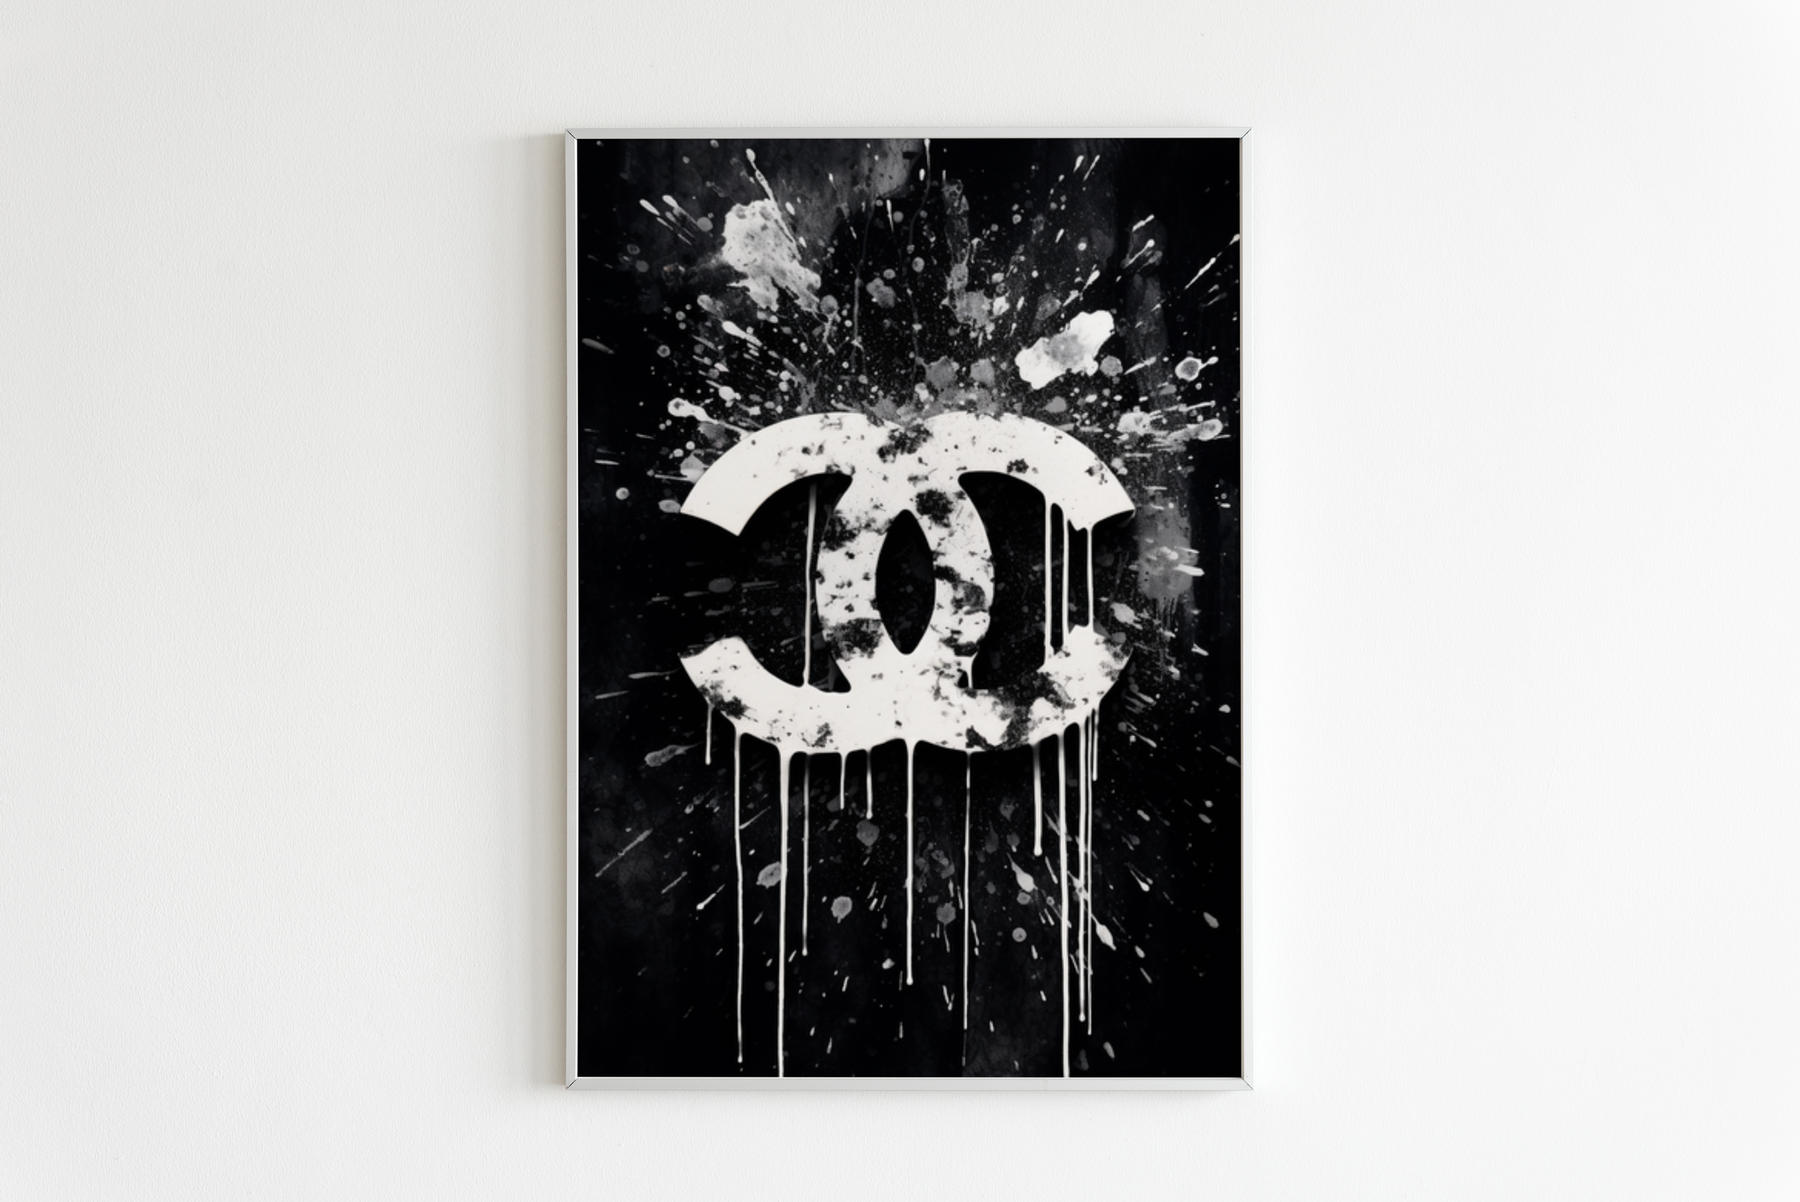 Coco Chanel Poster, Poster Coco Chanel, Black White Poster, CC Poster, Chanel Logo Poster, Elegant Poster, Living Room Decoration, Wall  decoration, Wall poster